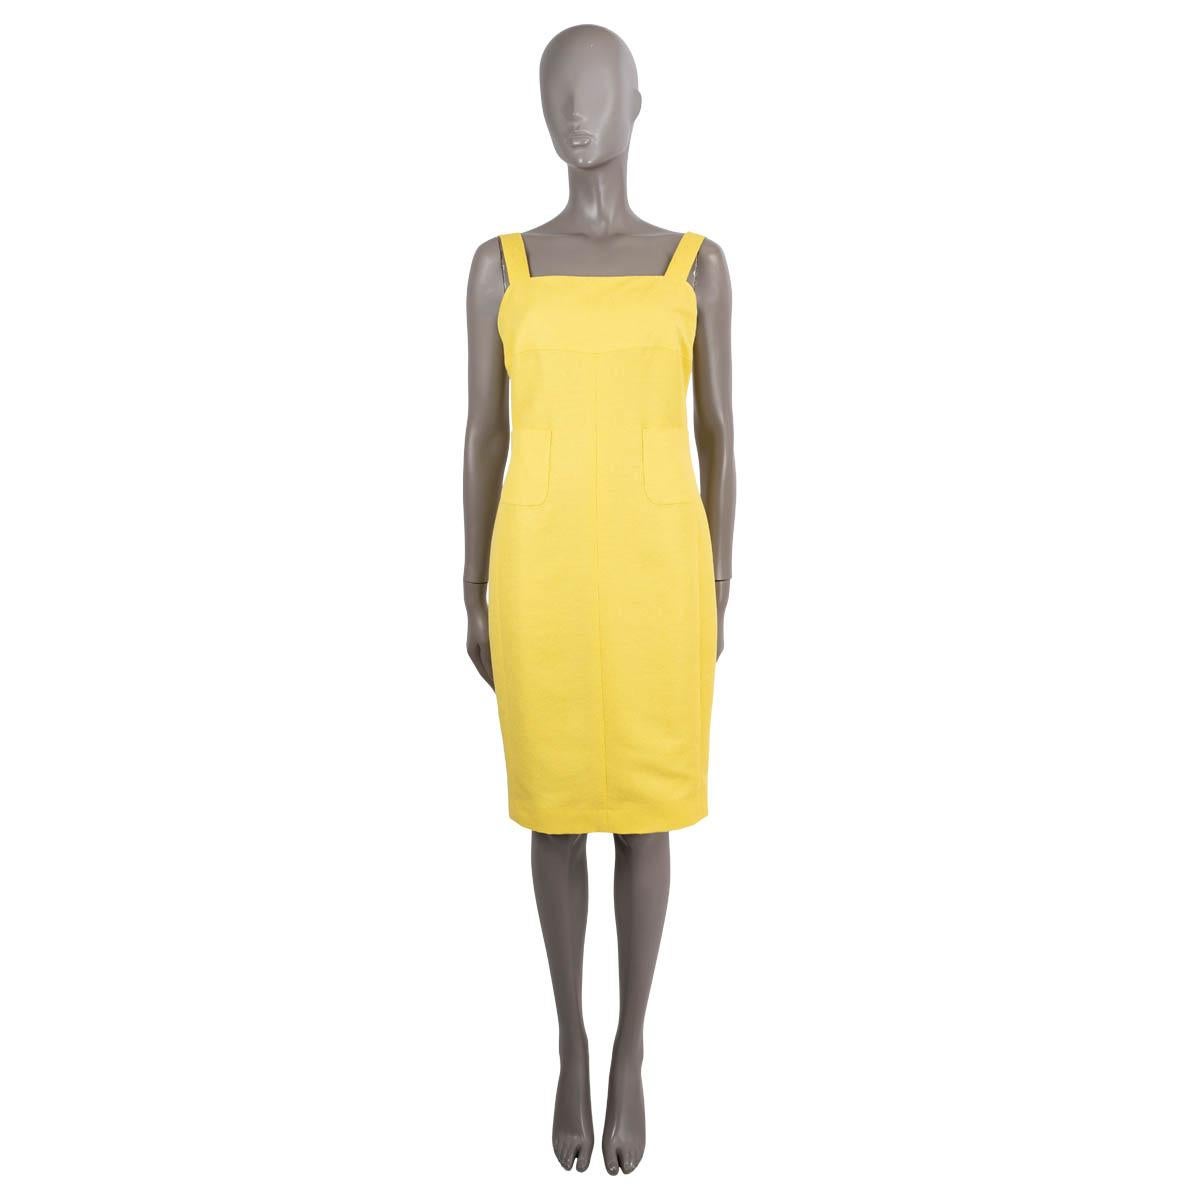 100% authentic Chanel sleeveless sheath dress in yellow lurex crepe silk (with 12% nylon). Features a fitted silhouette with two patch pockets on the front. Opens with a concealed zipper in the back. Lined in cotton (55%) and silk (45%). Has been